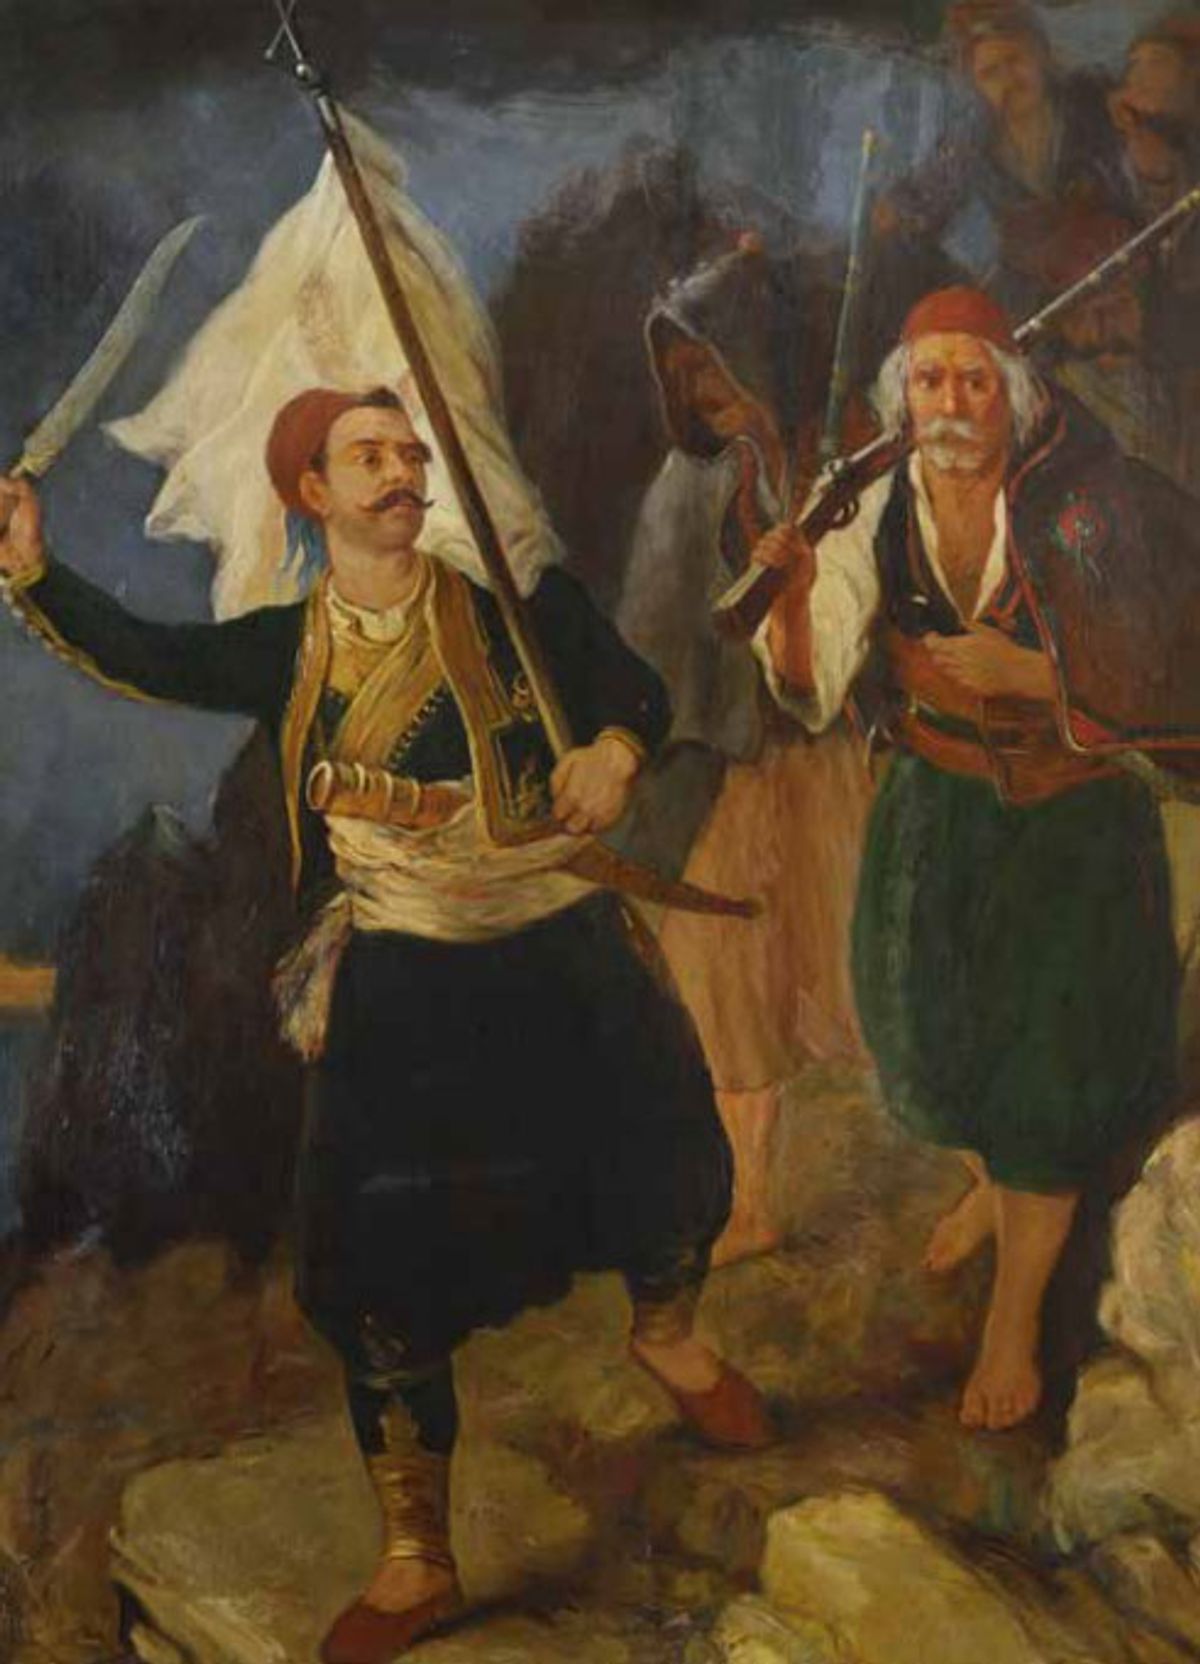 Unknown artist, Petrobey Mavromichalis rousing Messinia, copy of an oil sketch from a group of paintings depicting scenes from the Greek Revolution created by Peter von Hess, 1839 National Bank of Greece S.A.